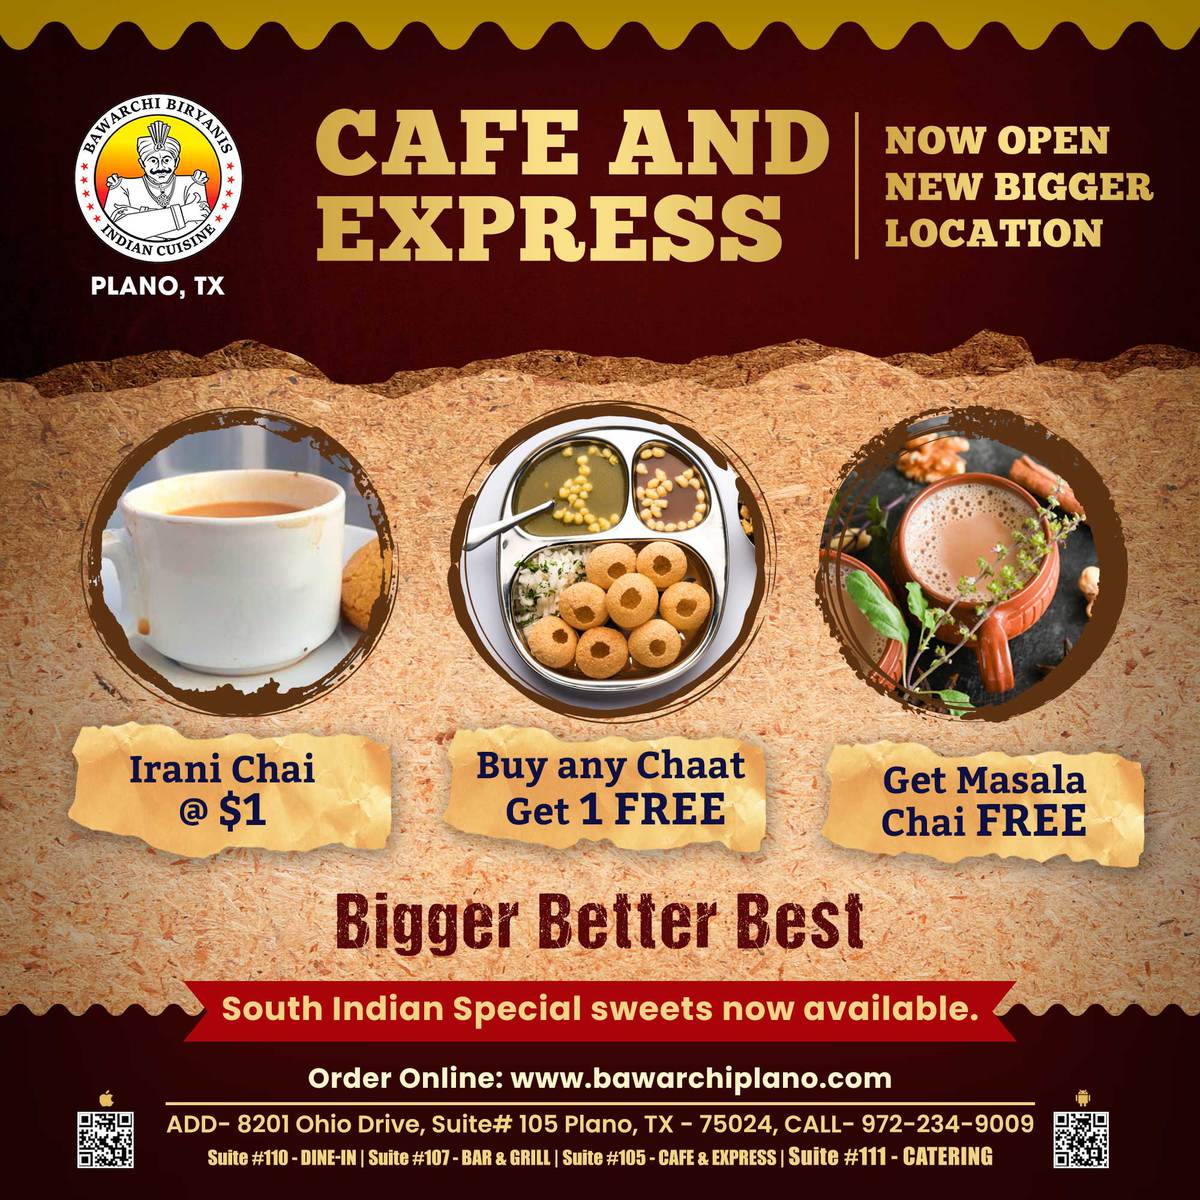 Cafe and Express